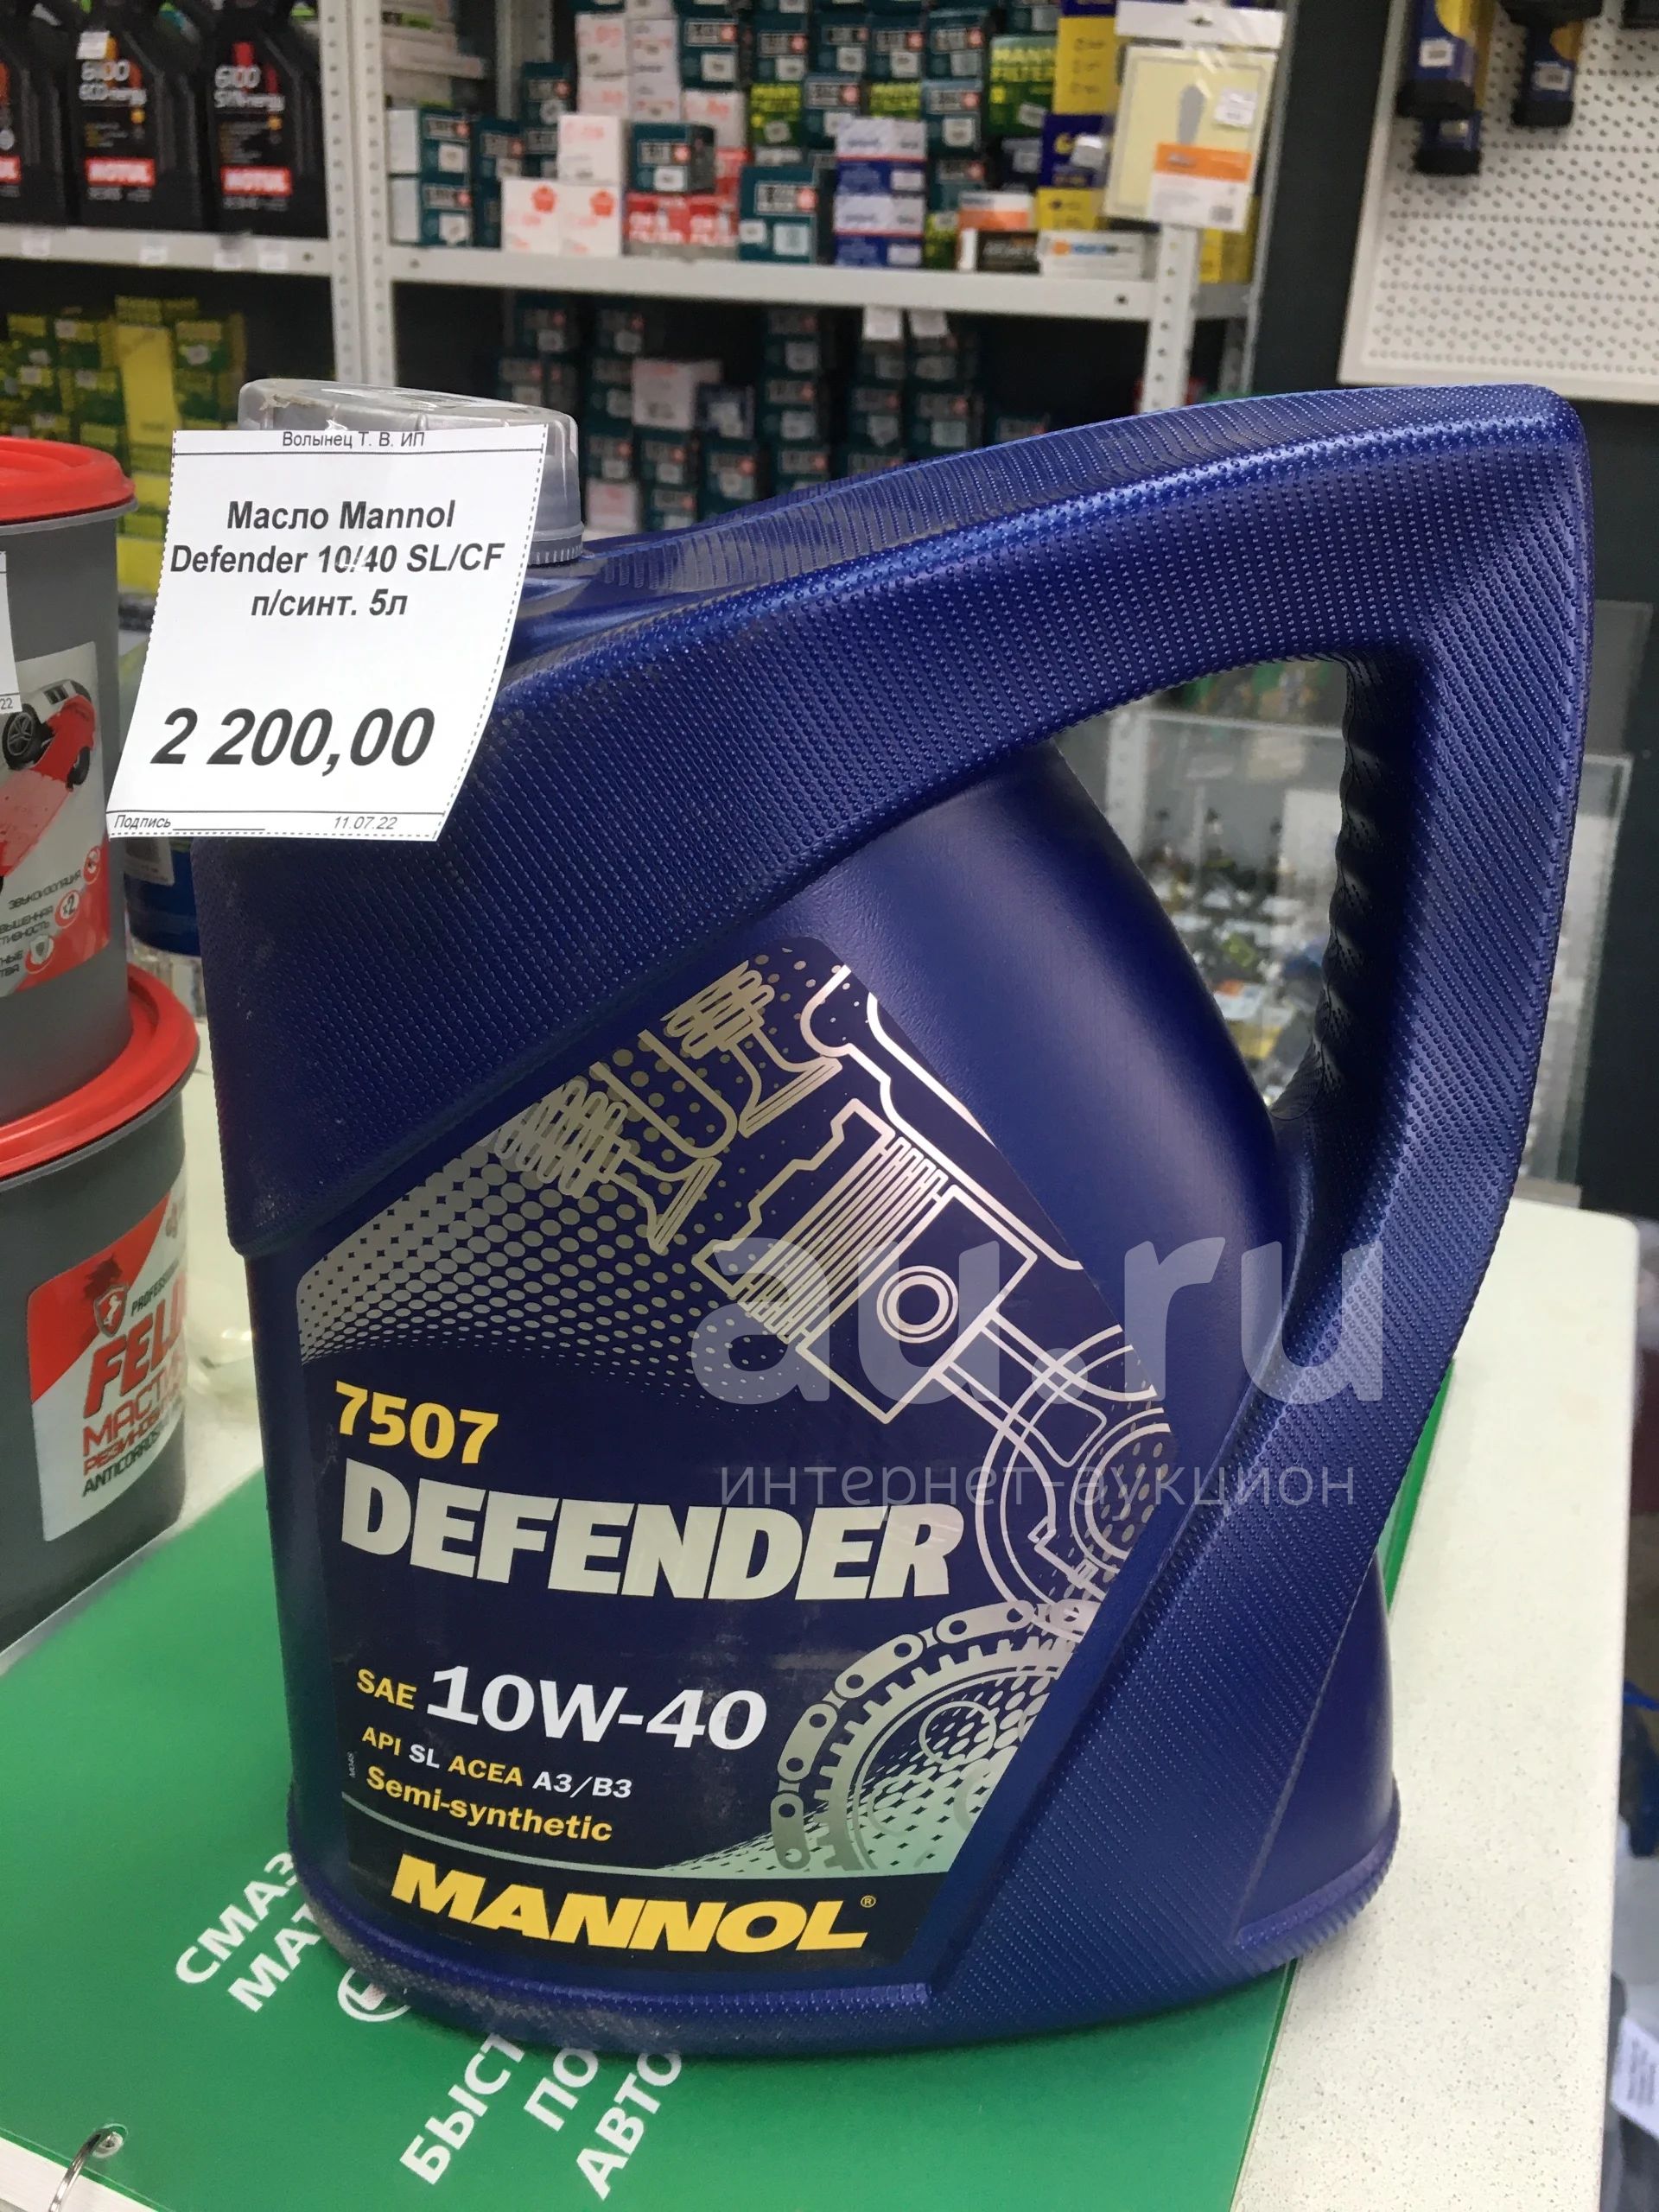 Defender oil. Манол Дефендер 10w 40. Mannol Defender 10w-40 моторное. St705 Mannol масло. Масла Маннол Экстра 4 л.